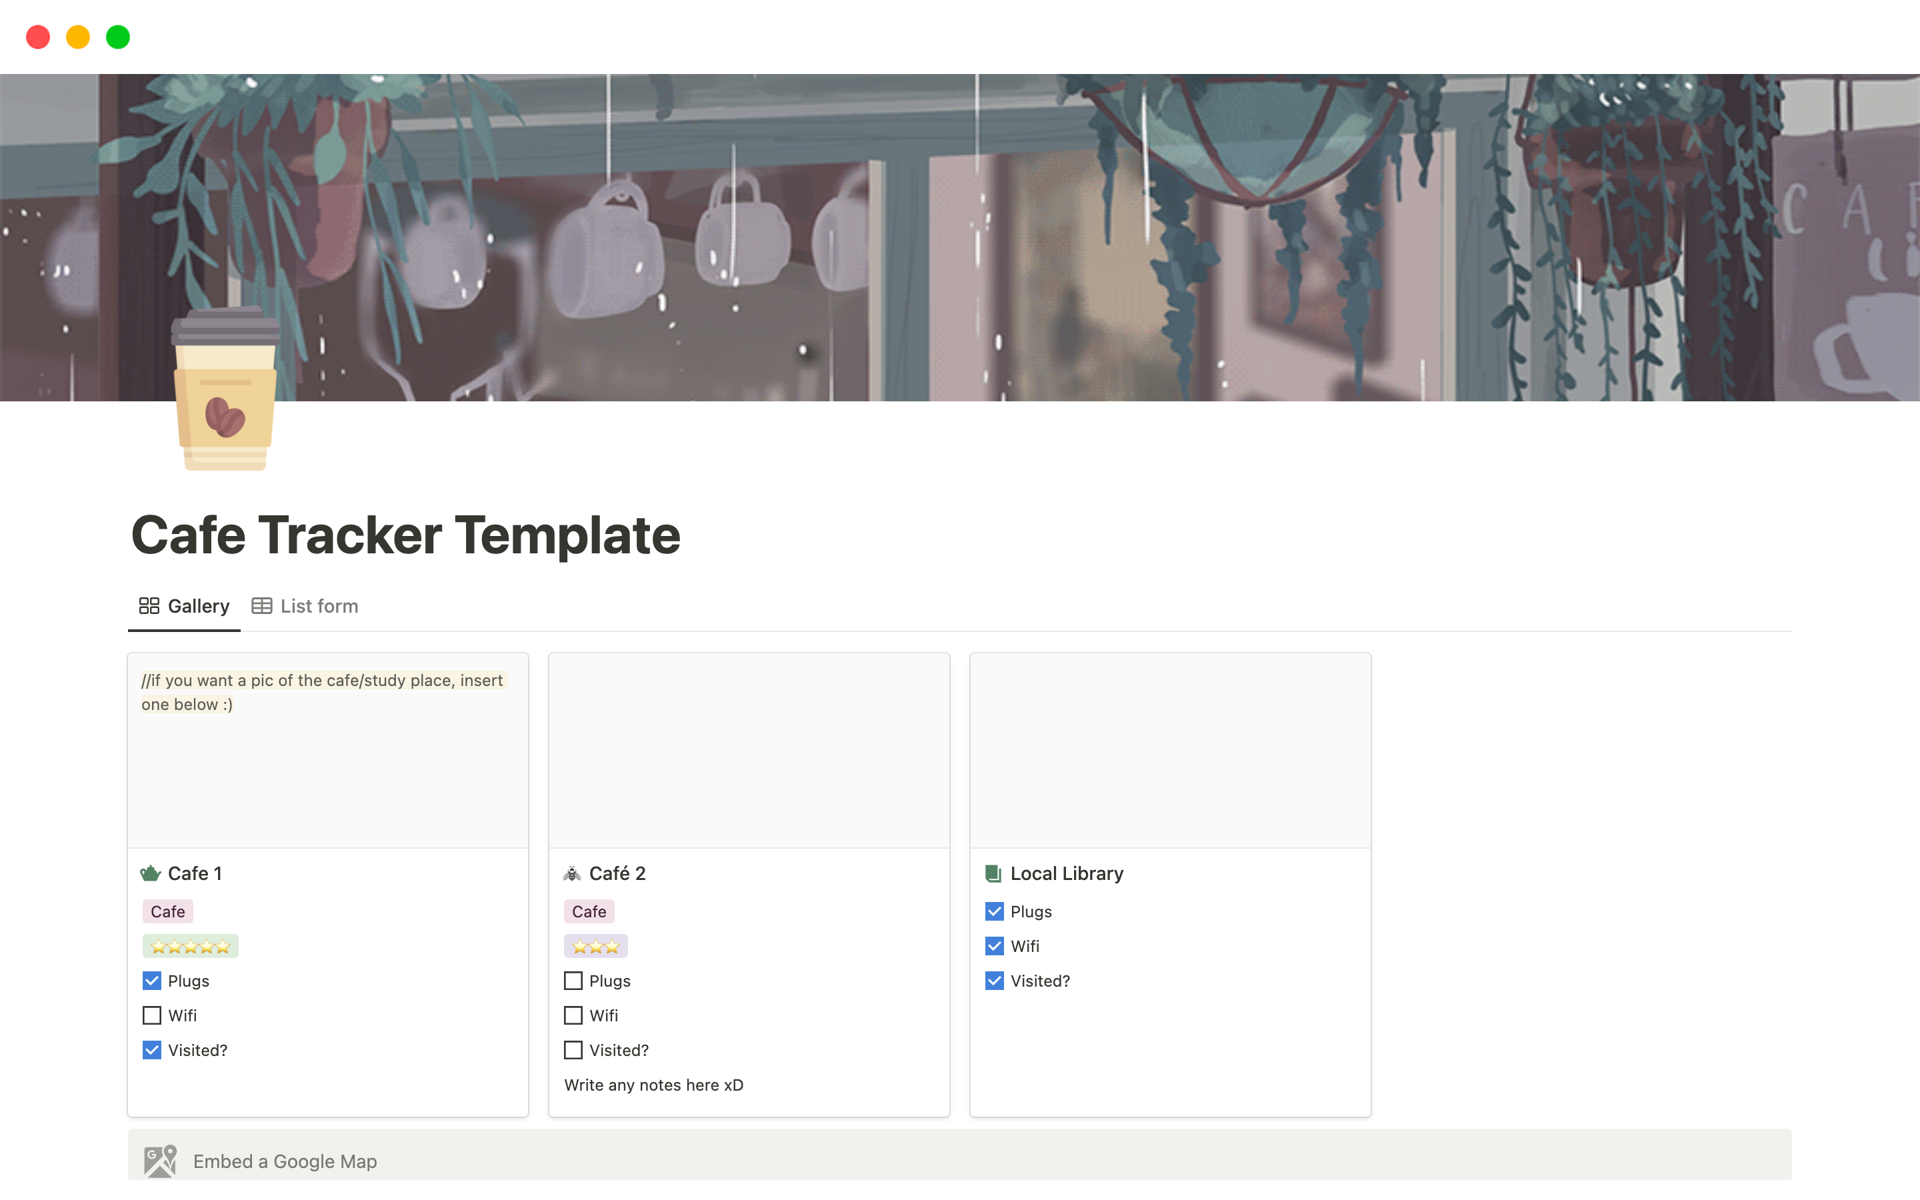 Keep track of your favorite cafes and their qualities, with this cafe tracker template.